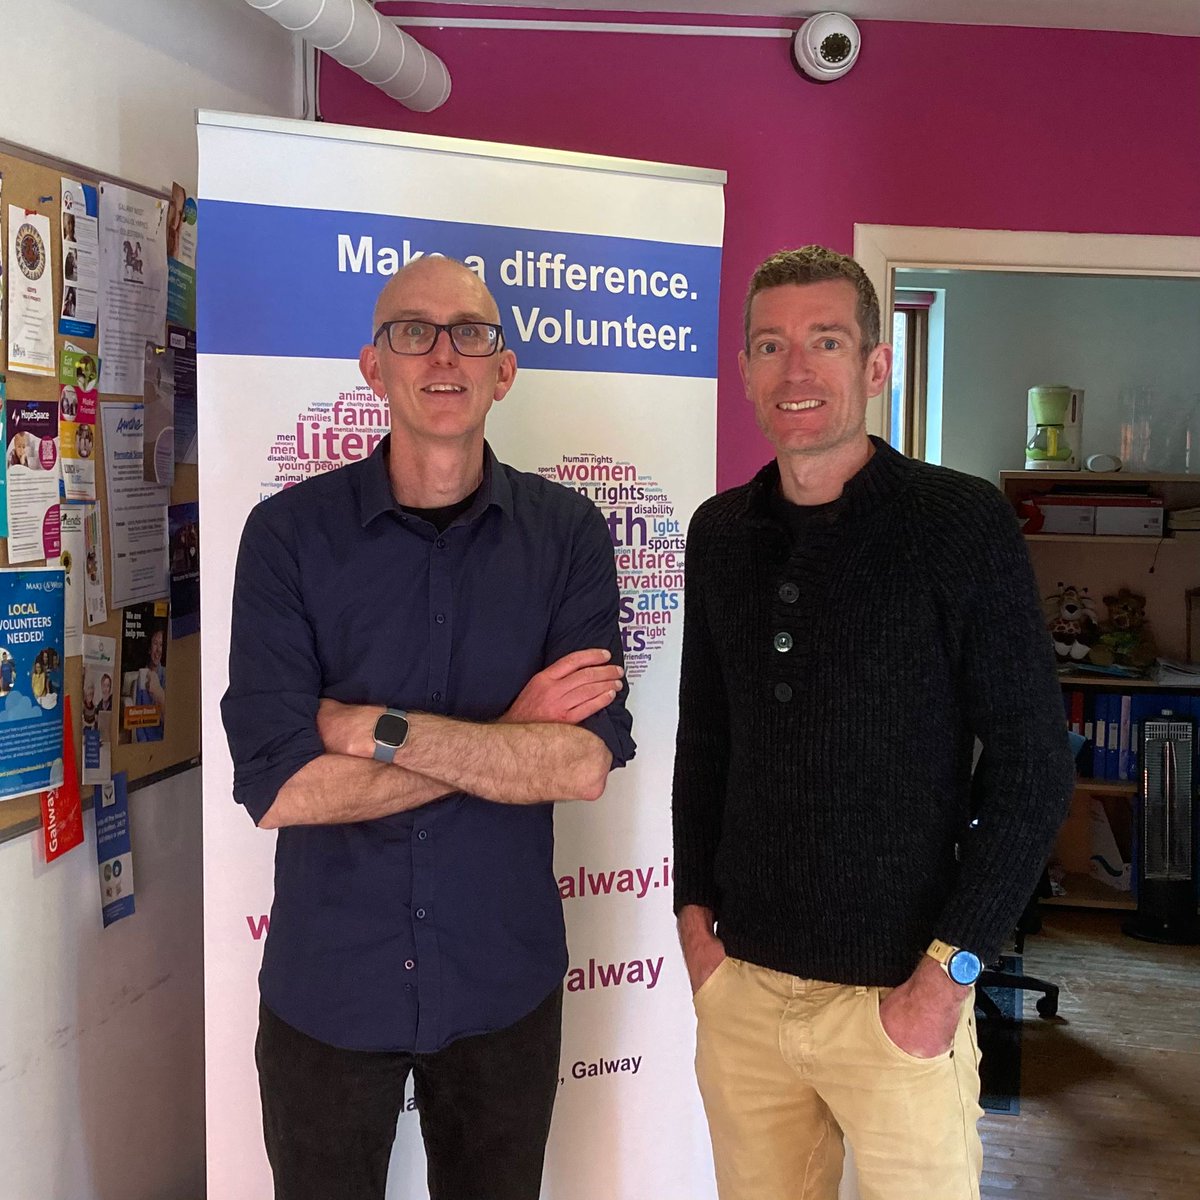 Had a great chat with Donncha today at the Galway Volunteer Centre @volunteergalway. We urgently need a new community hub in the city incorporating office, exhibition, & social enterprise space. I fully support proposals for the old city hall to be repurposed for this use.